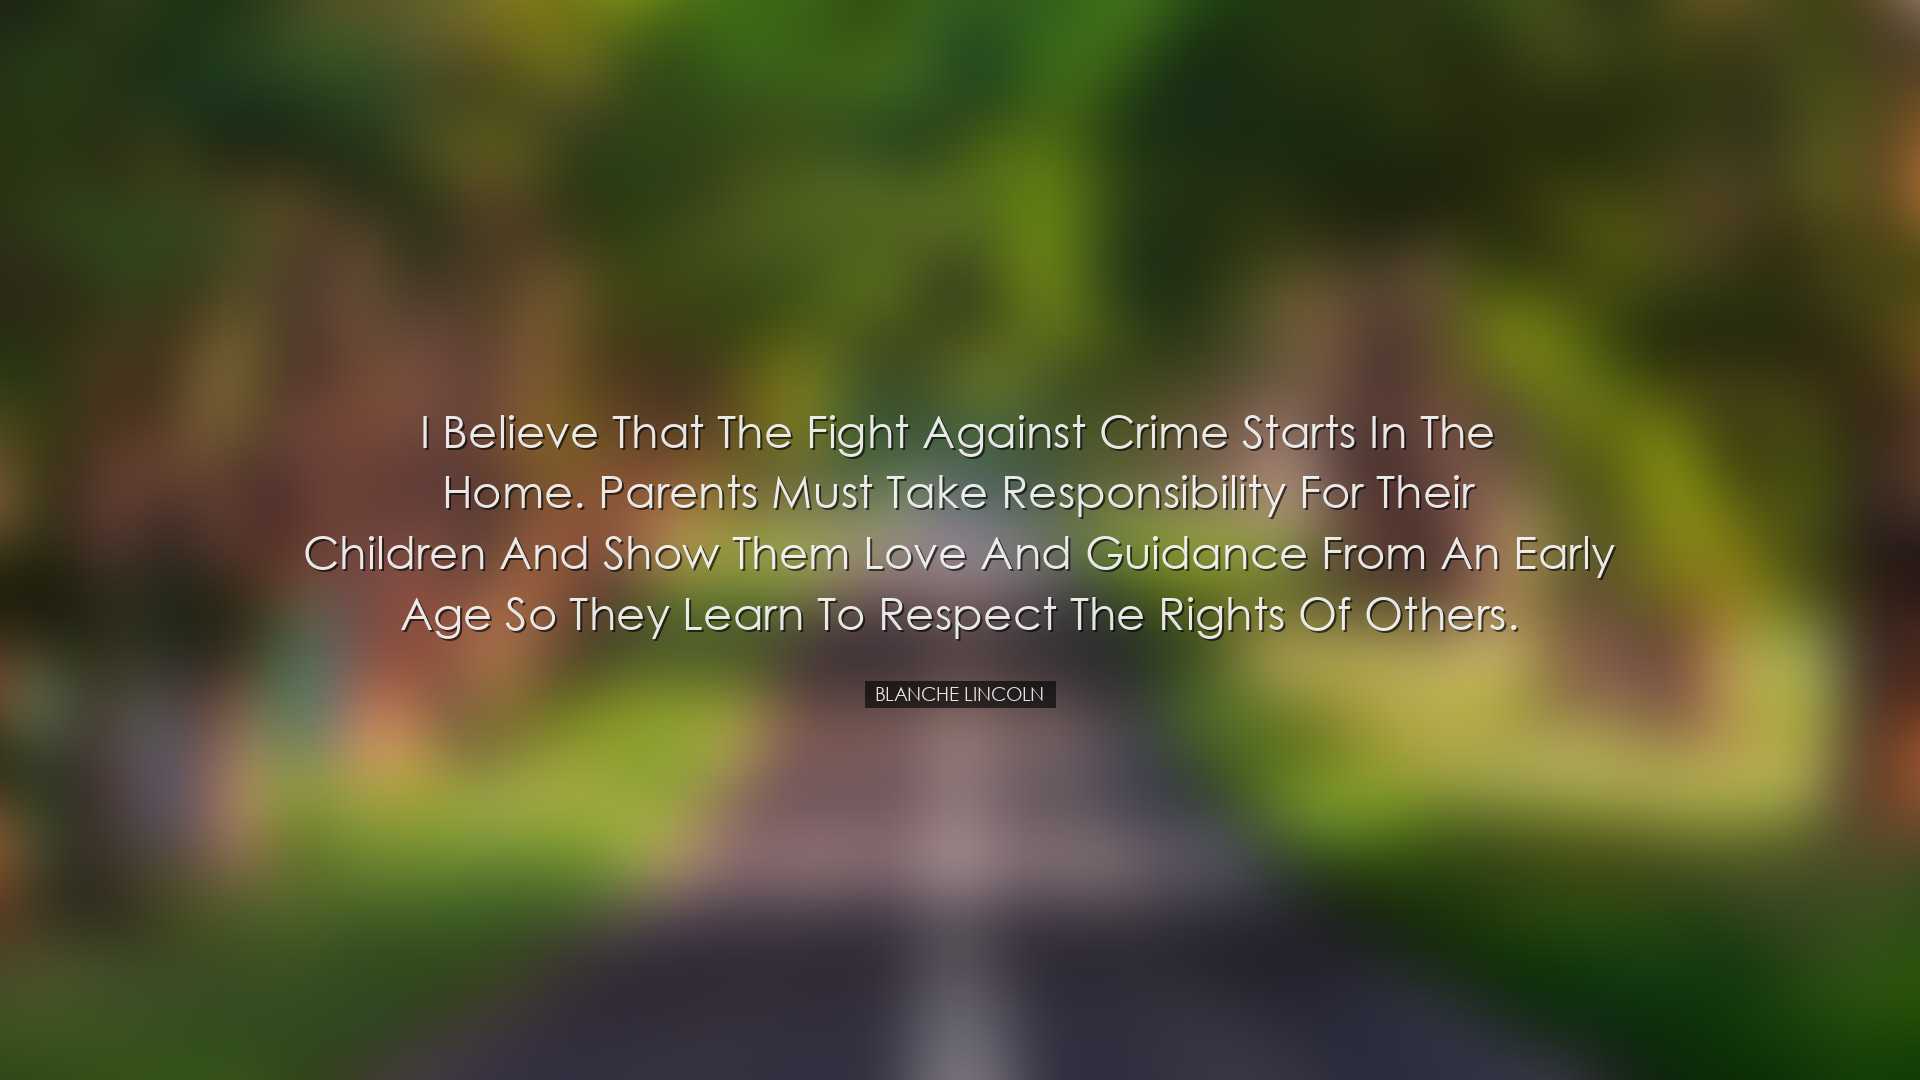 I believe that the fight against crime starts in the home. Parents